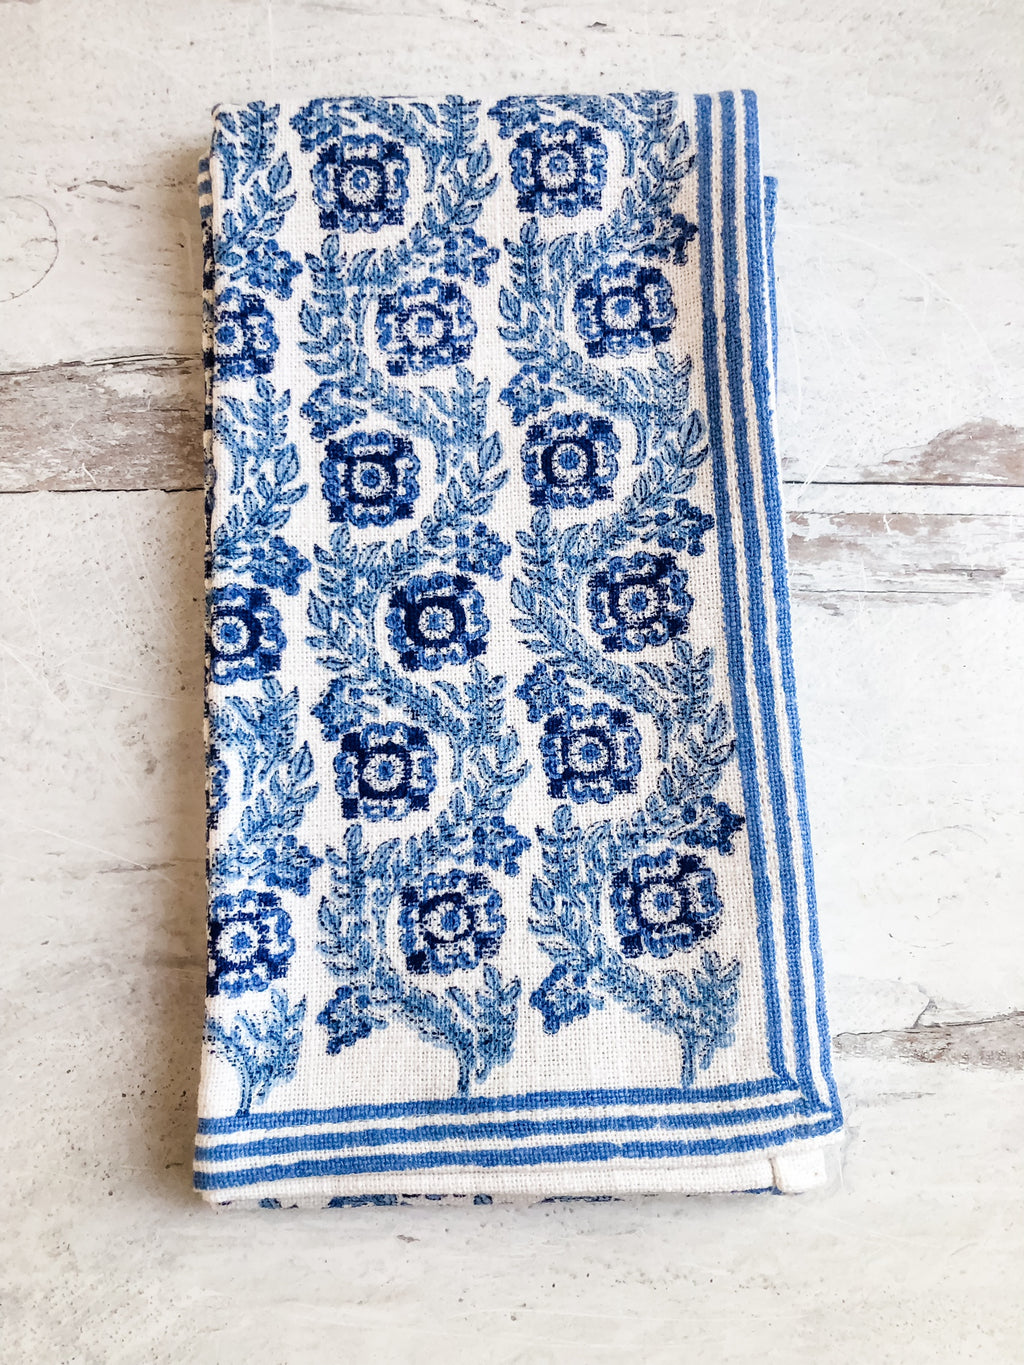 Kitchen Towel in Villa Vaux Grand Blue and White - set of 2